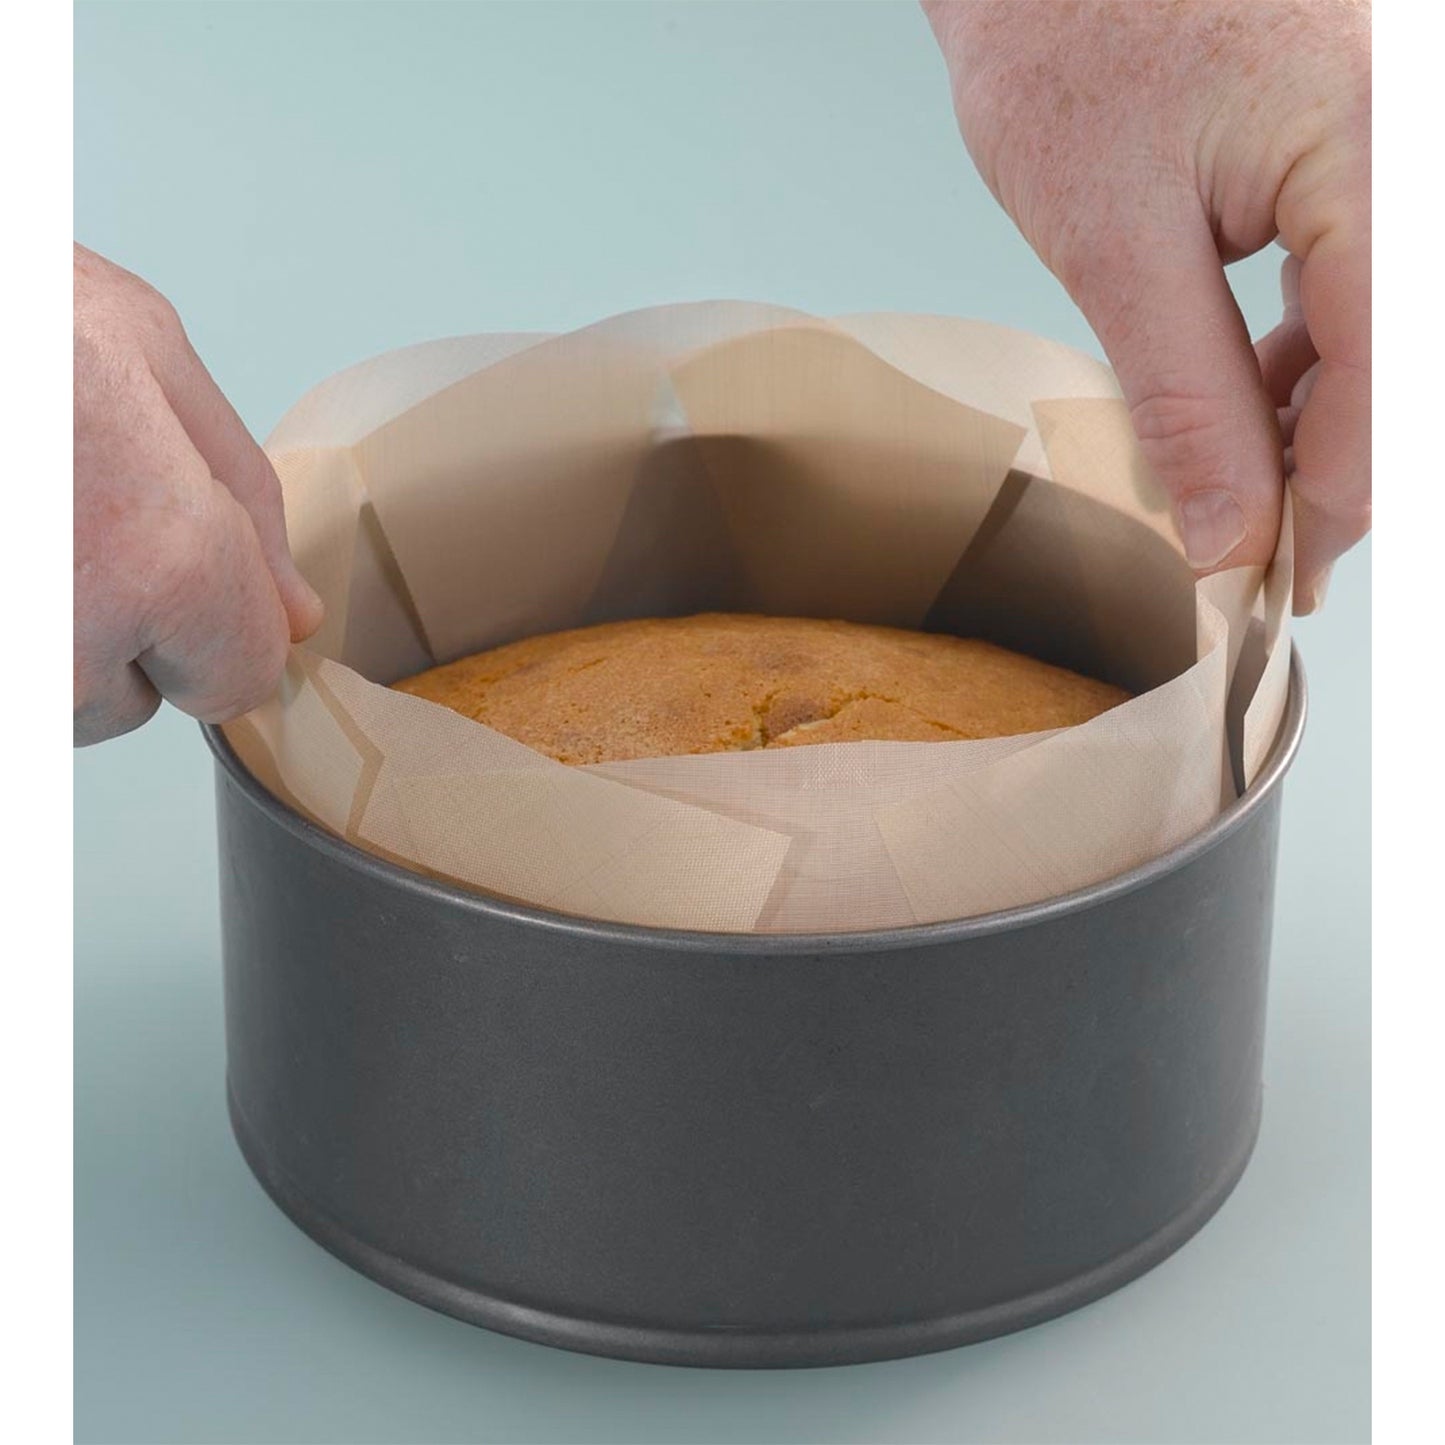 Universal Cake Tin Liner - Fits 7", 8" & 9" Tins, pack of 2